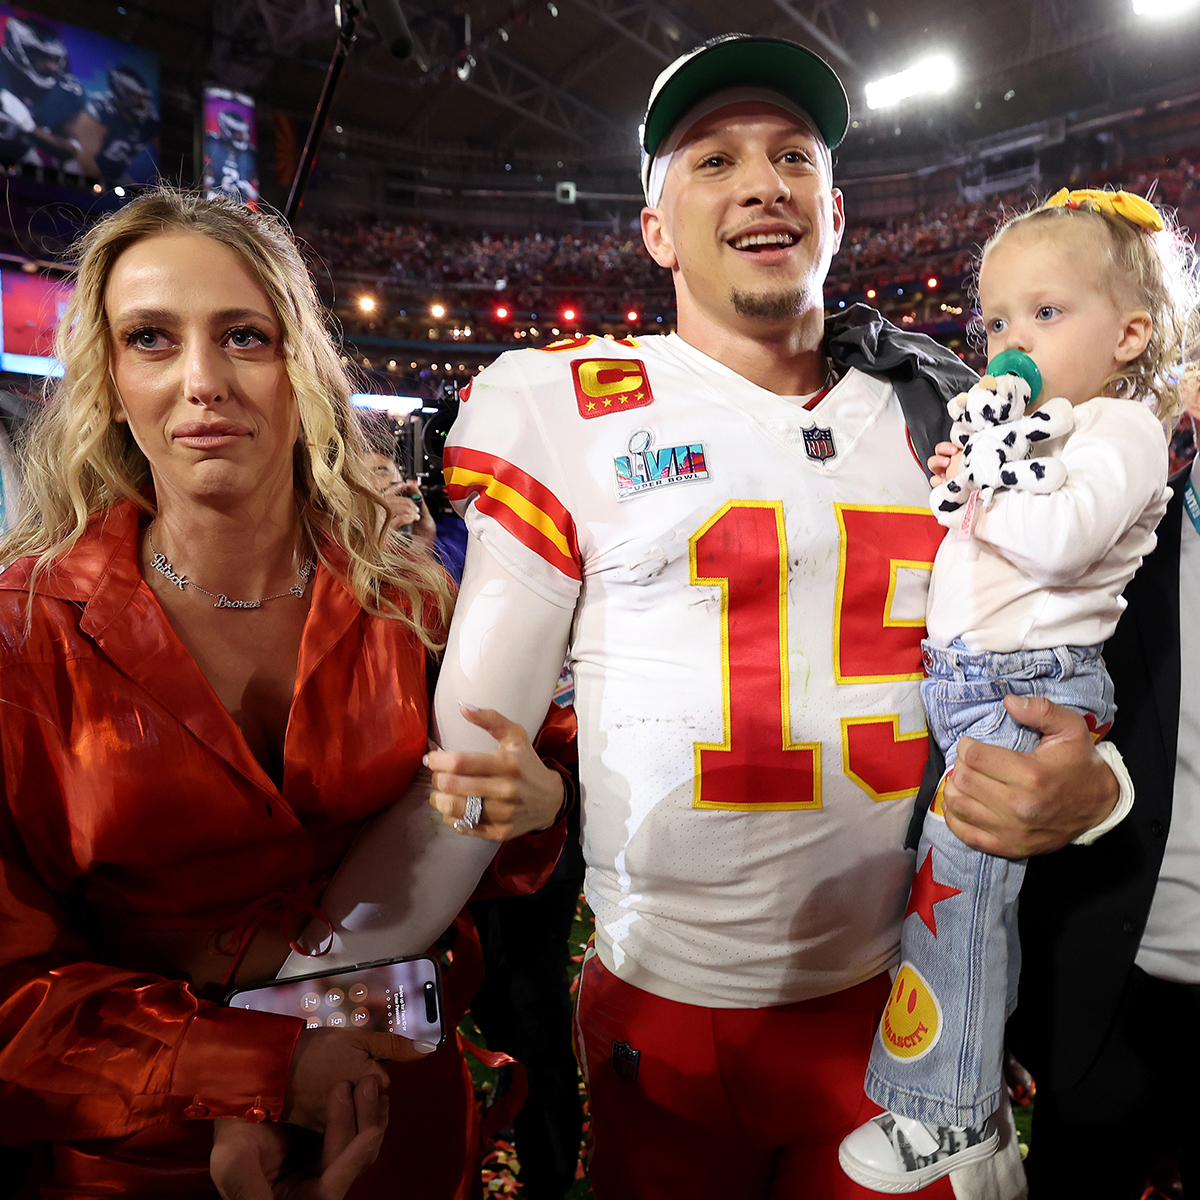 Brittany Mahomes Shares Photo of Daughter, 2, Wearing Louis Vuitton Sunhat  for Beach Day: 'Our Angel